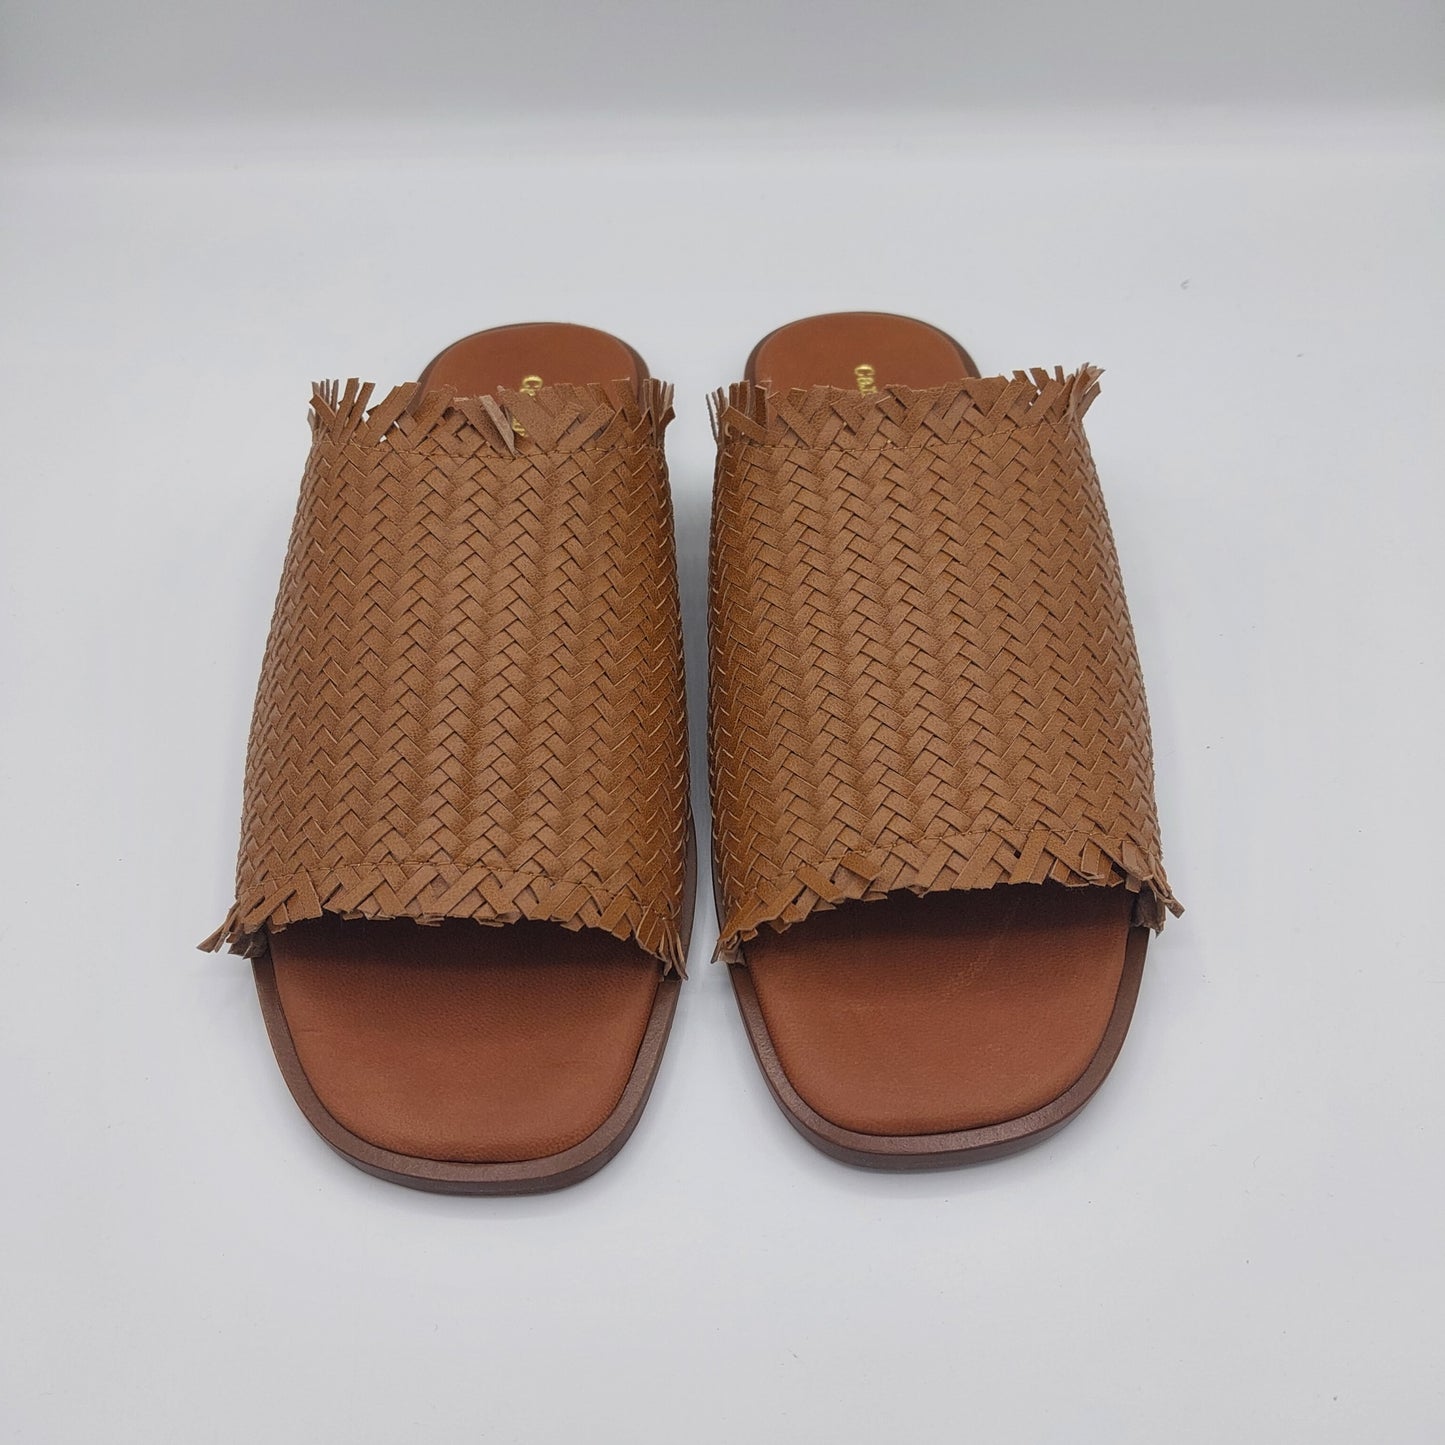 Cantini &amp; Cantini slipper in braided leather